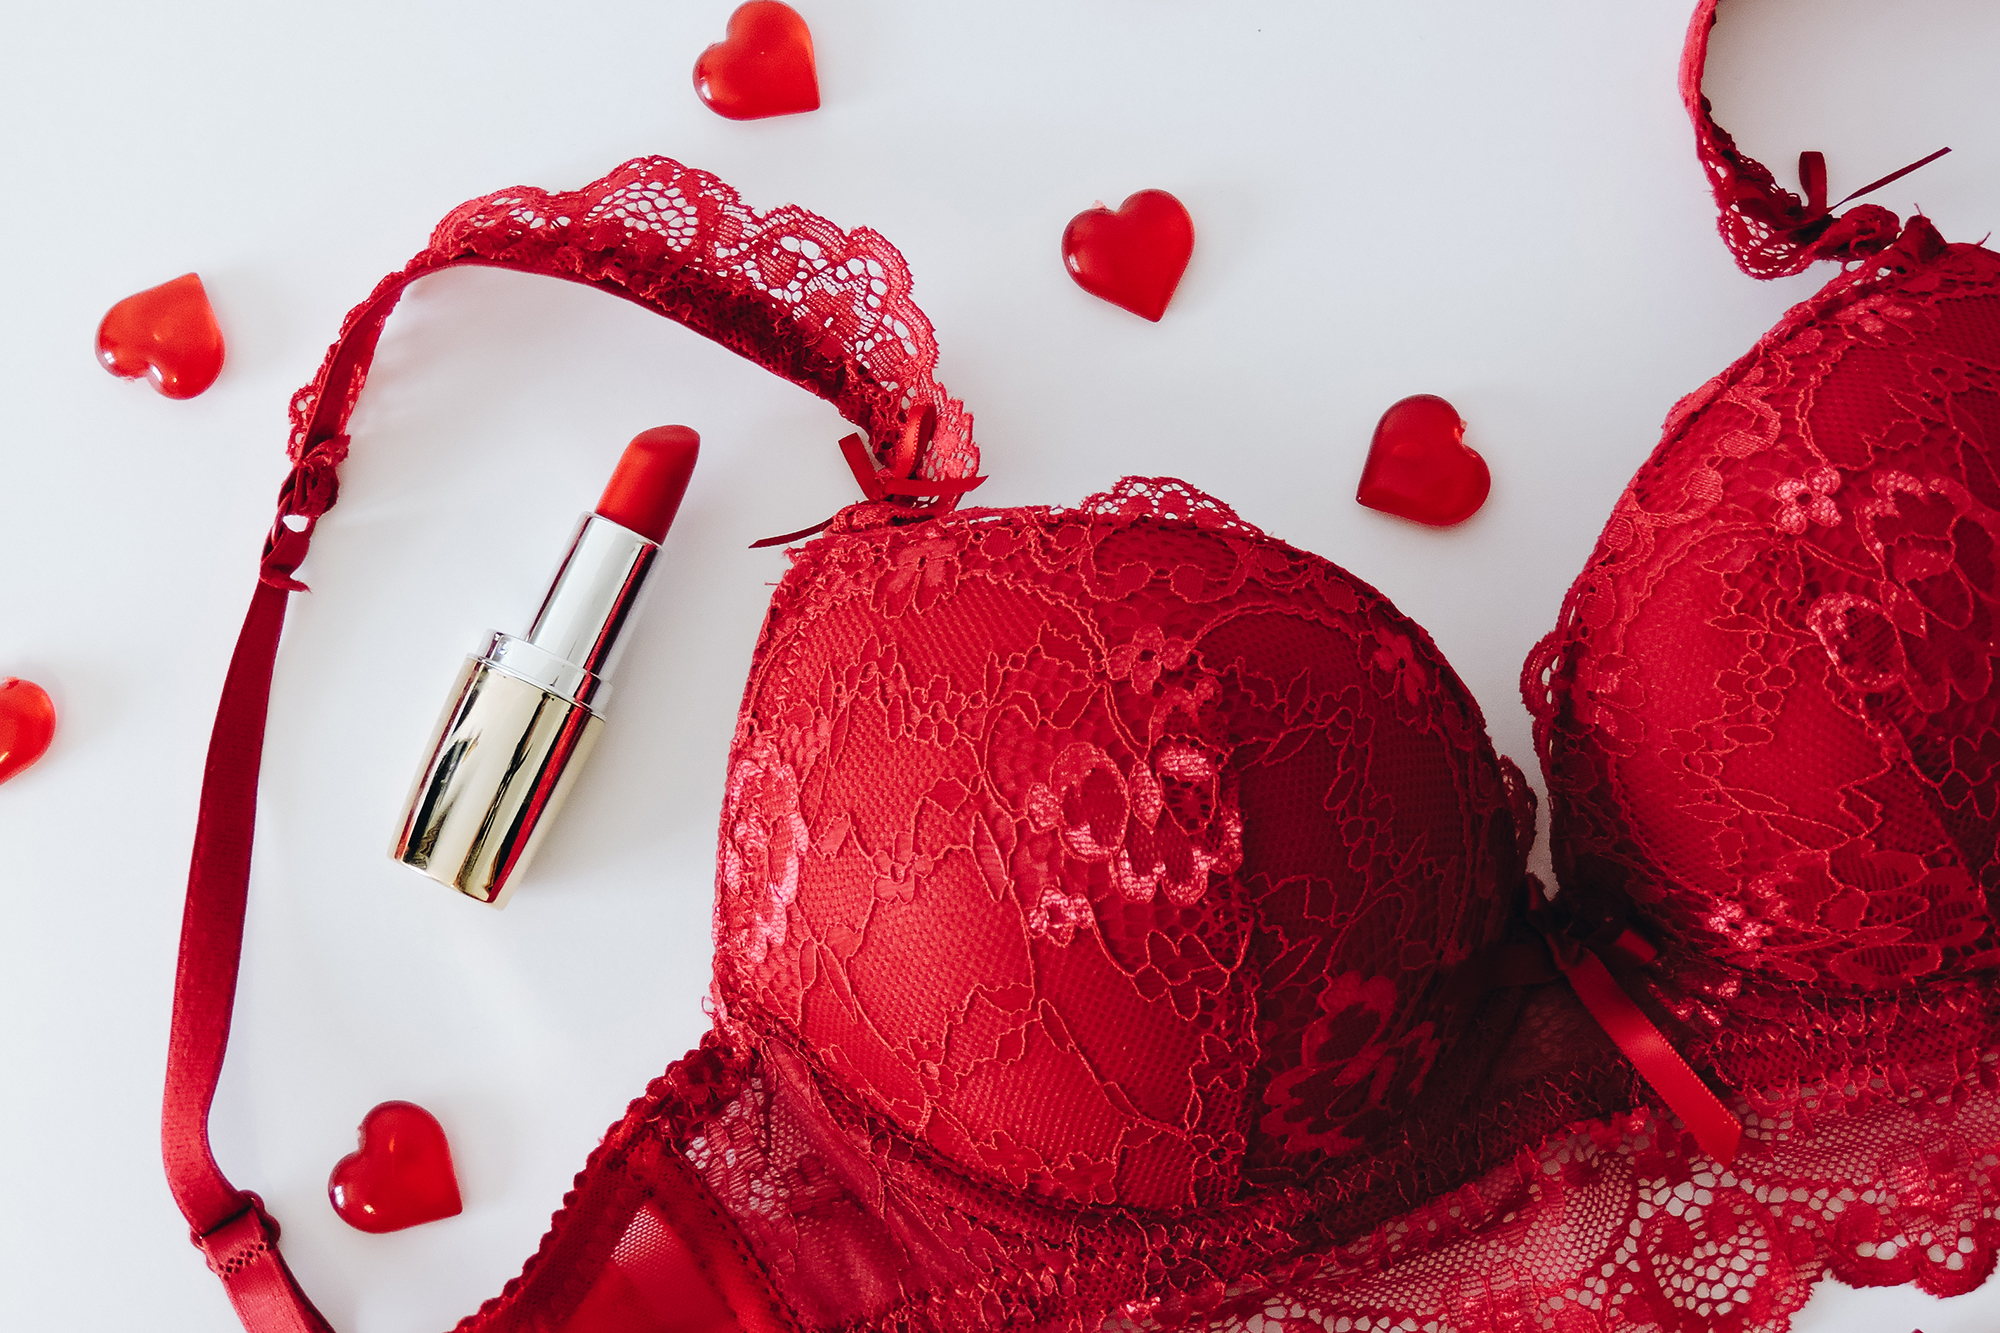 Vanila Lingerie - Promising you a world of confidence and charm with every  delicate detail. Happy Promise Day! 💖✨ #lingerie #lingerielove  #lingeriestore #clothing #clothingstore #valentine #valentinegifts  #valentineday #promiseday #clothingforwomen